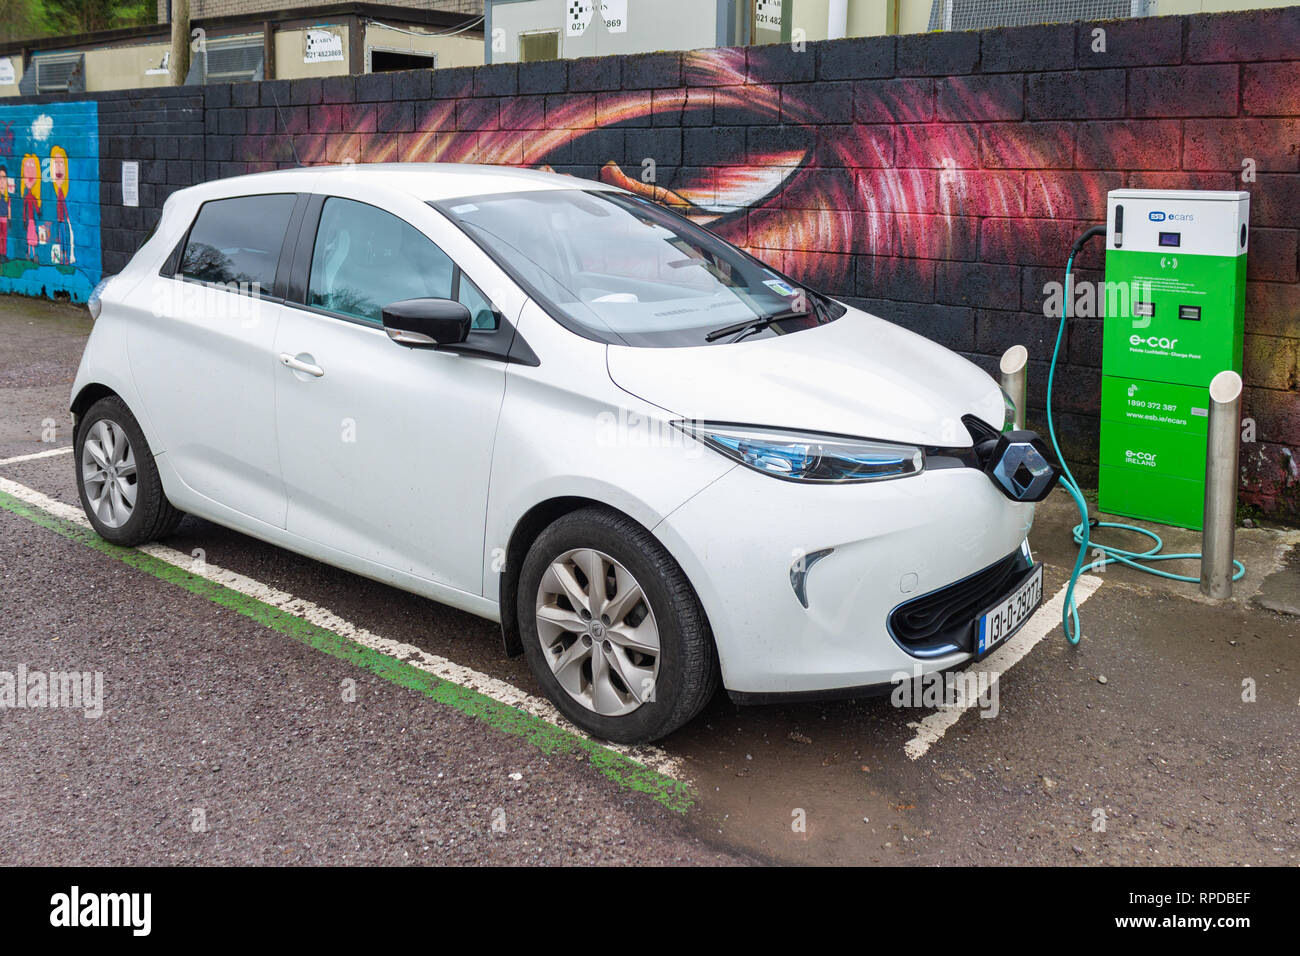 Electric car being charged at an electric car charging point bantry west cork ireland Stock Photo